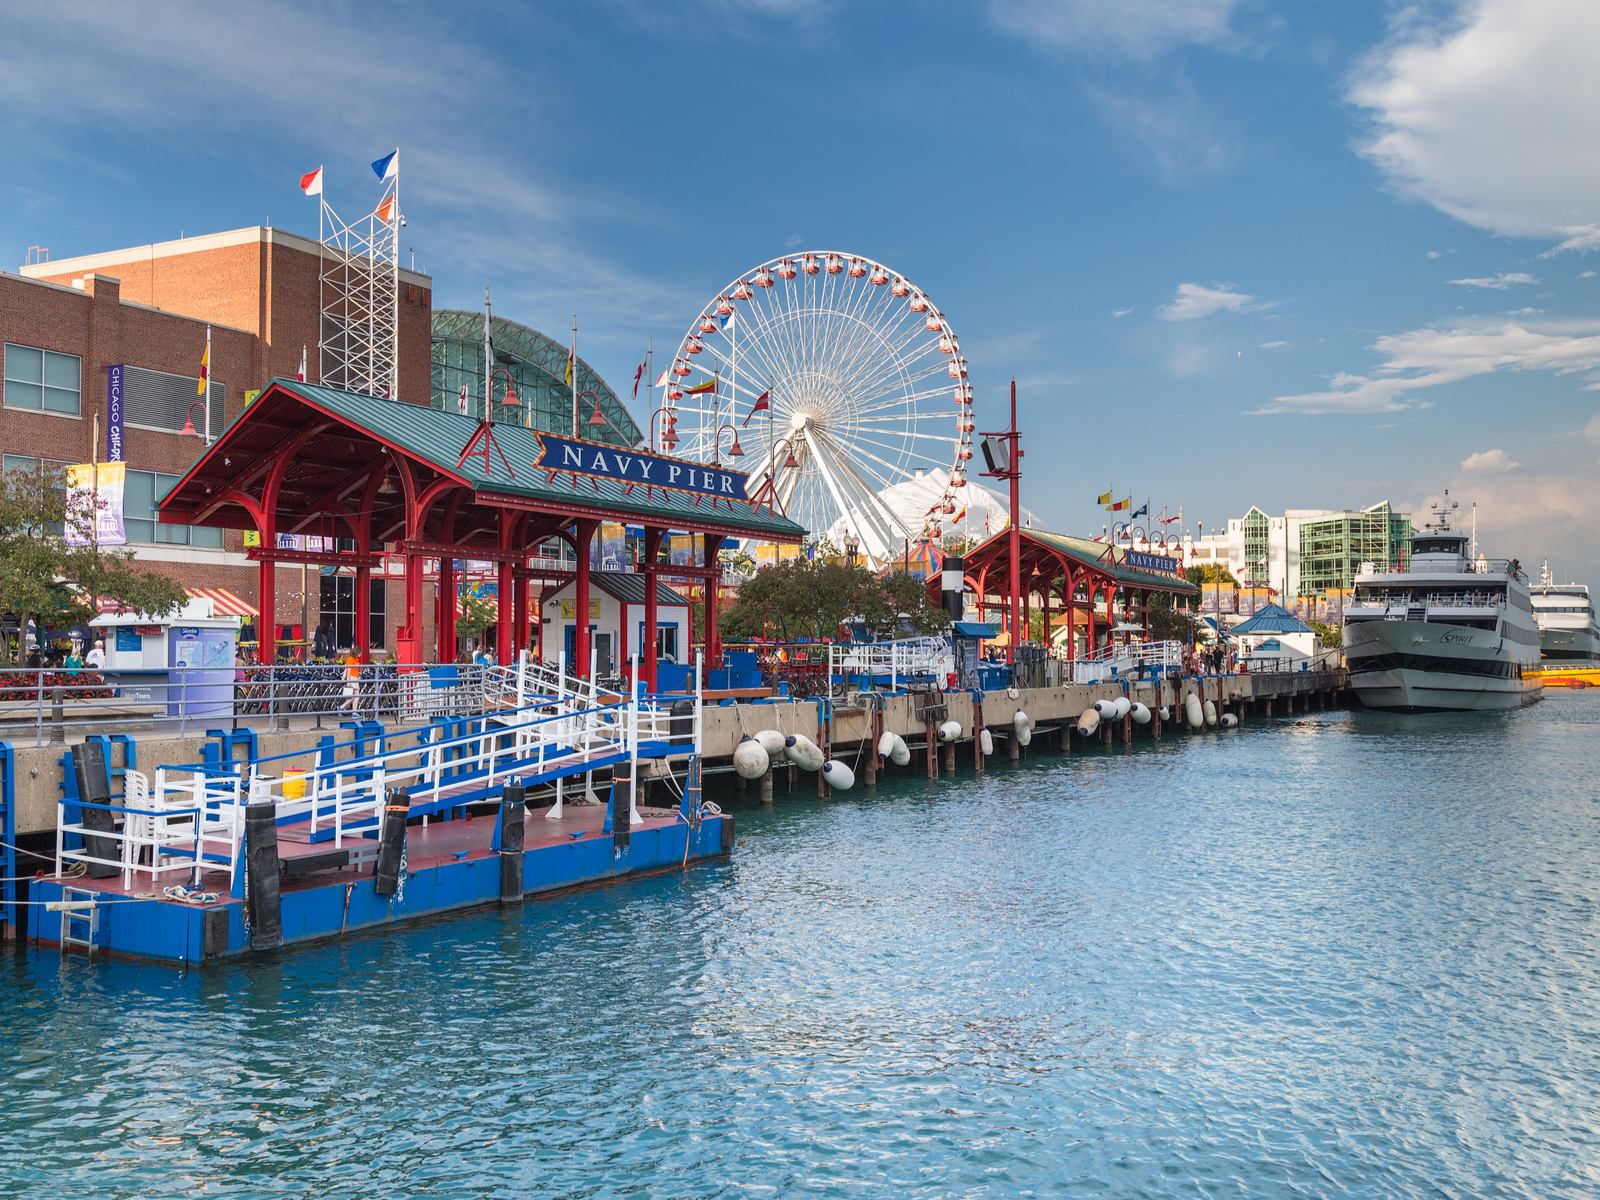 Photo of the Navy Pier, one of the best attractions in Chicago, as viewed in the middle of the day